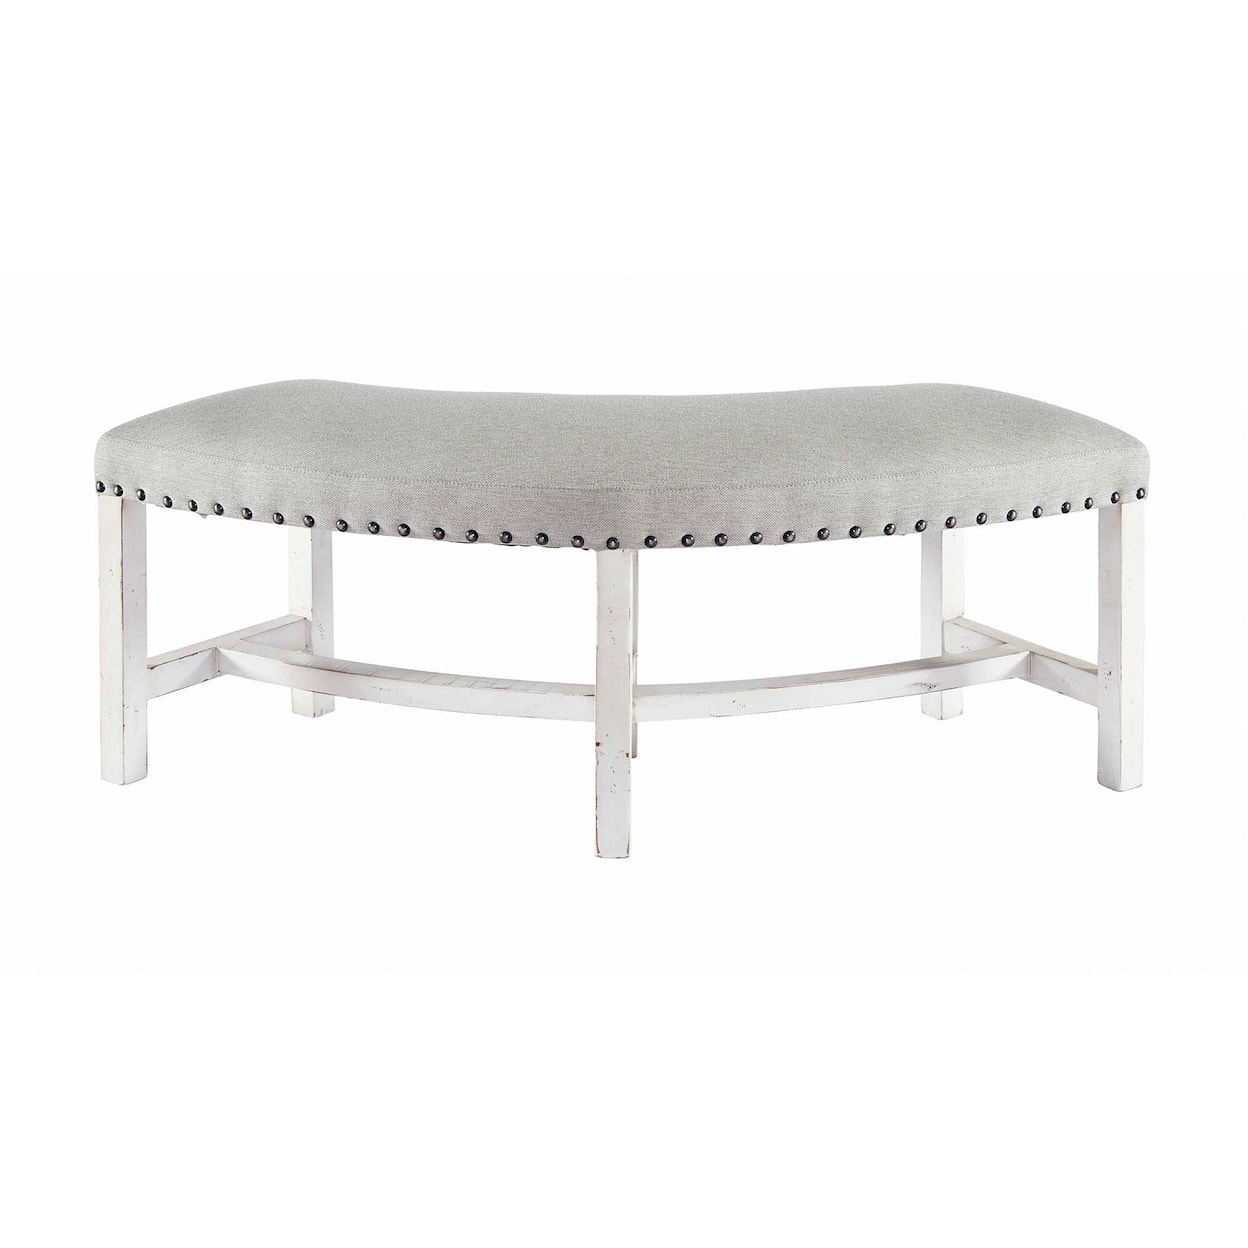 Elements International Condesa Round Upholstered Dining Bench